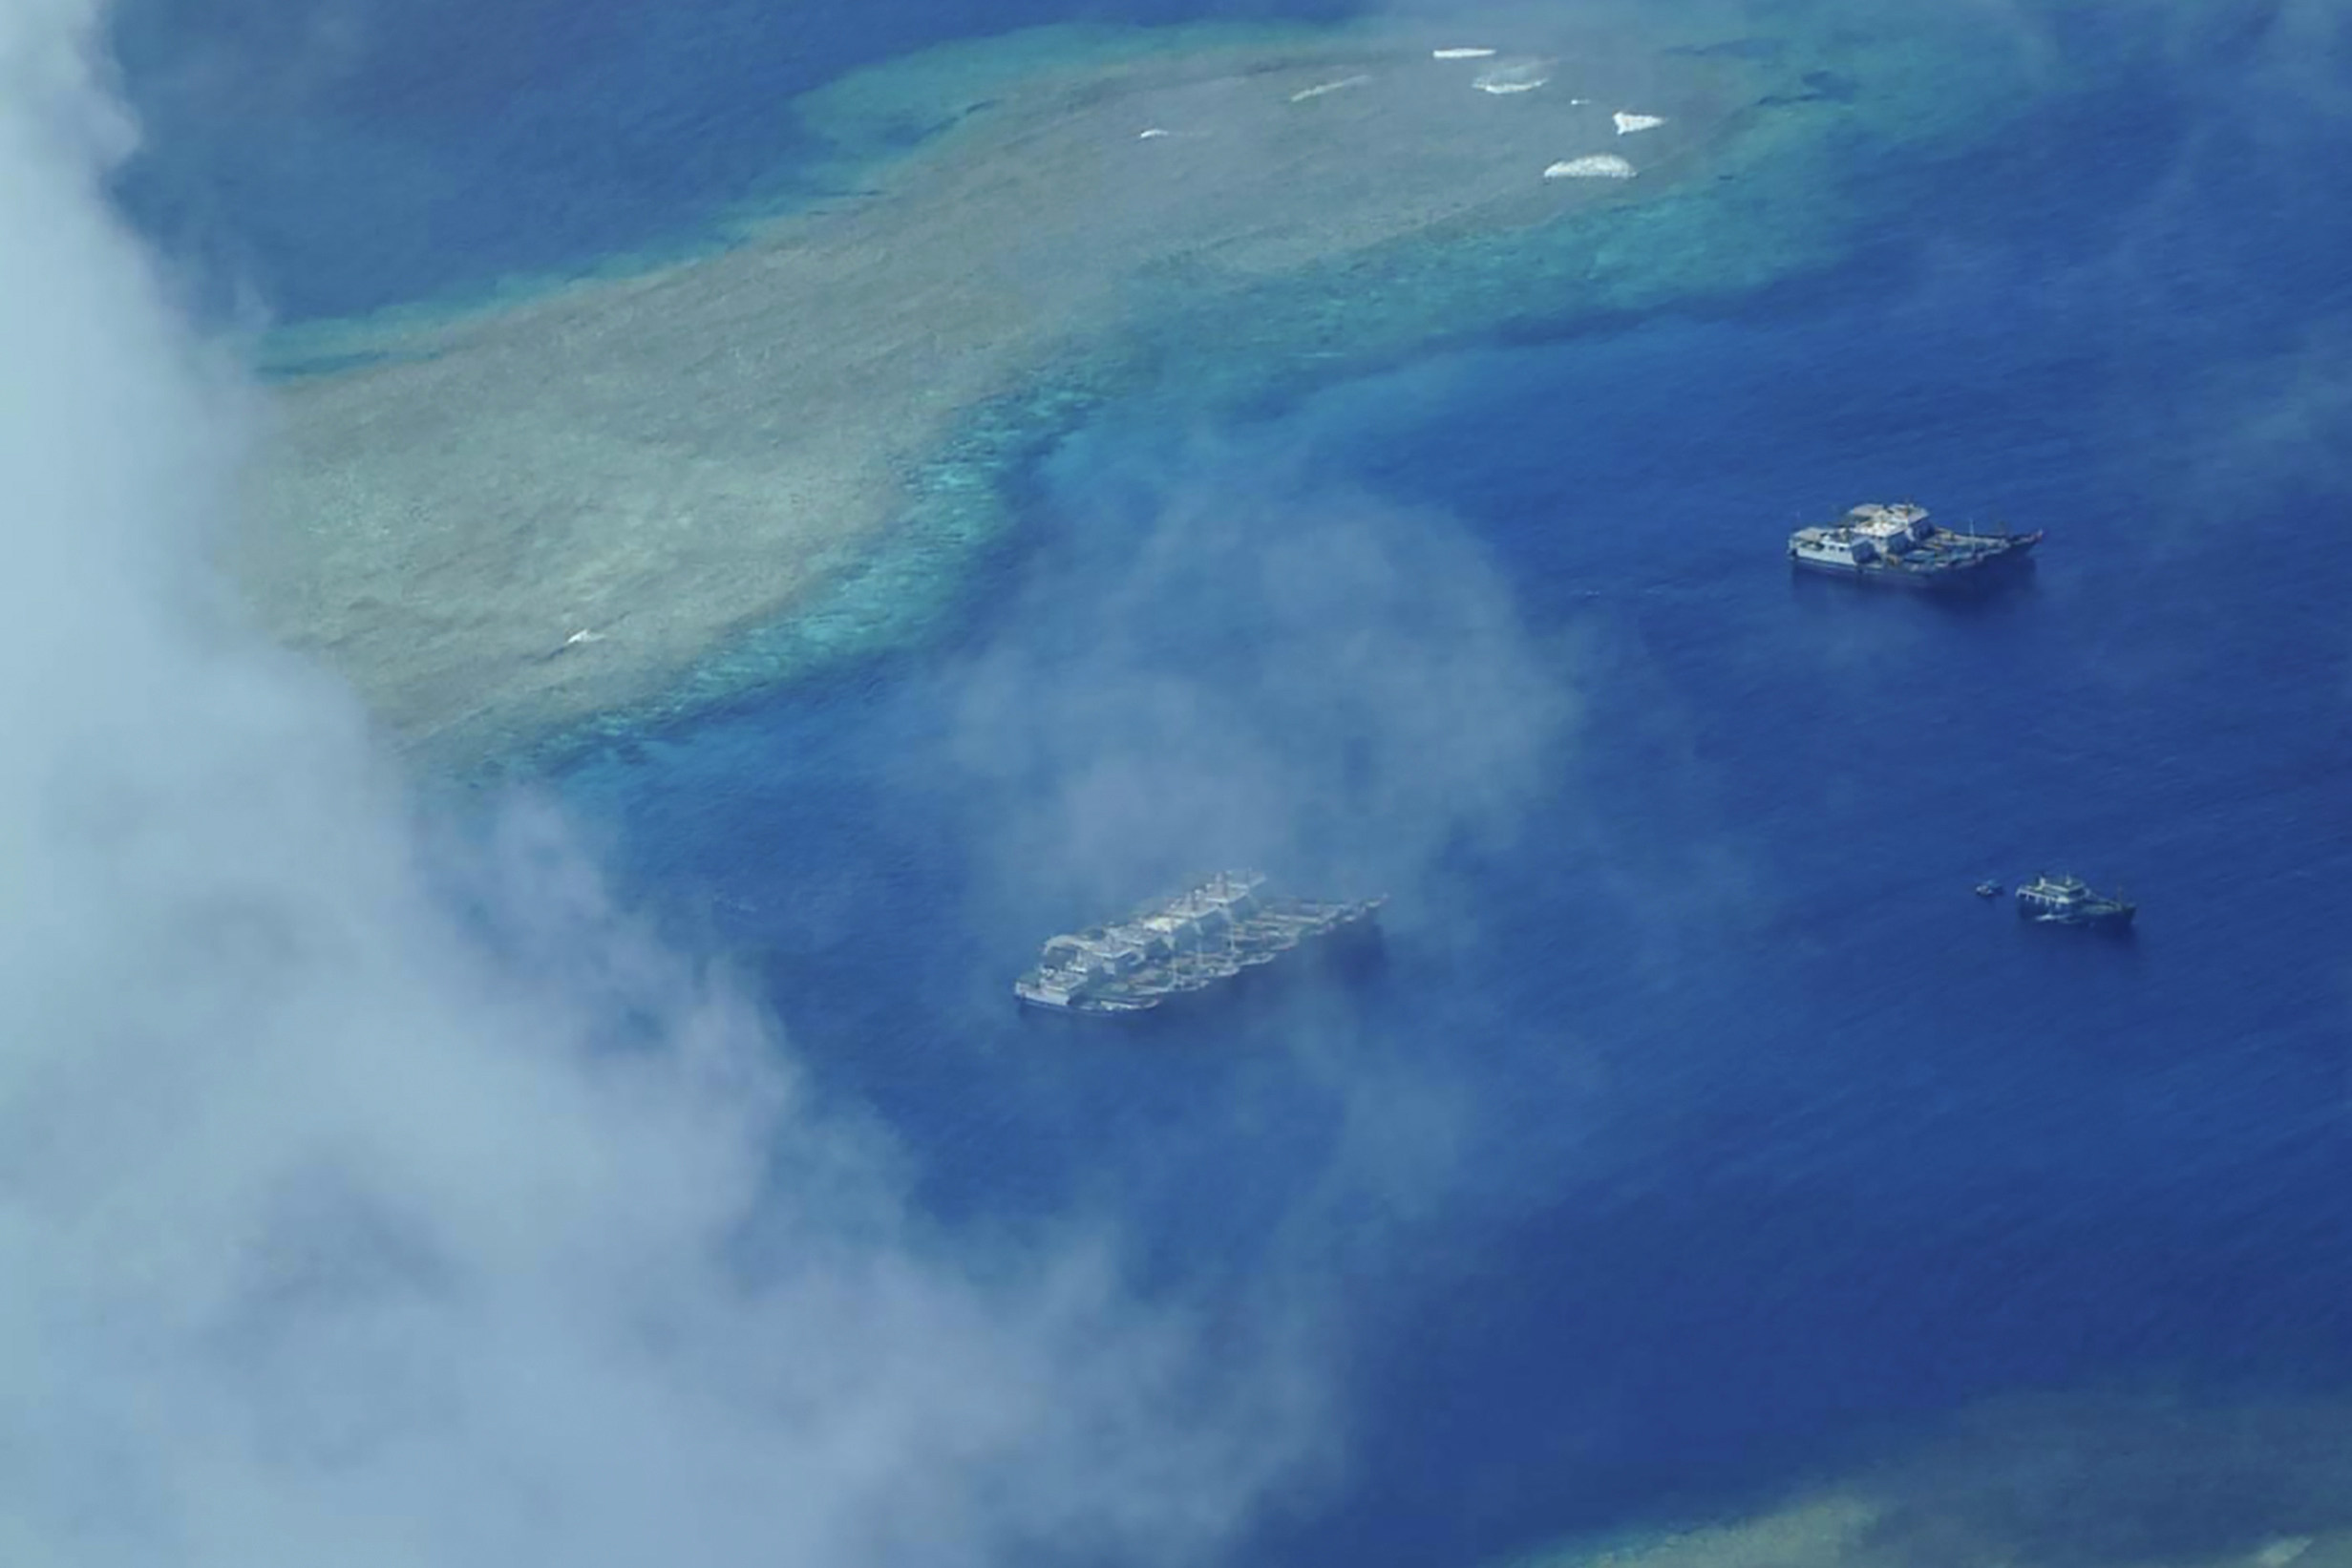 Tensions in the South China Sea between Beijing and Manila continue to hamper relations. Photo: AFP